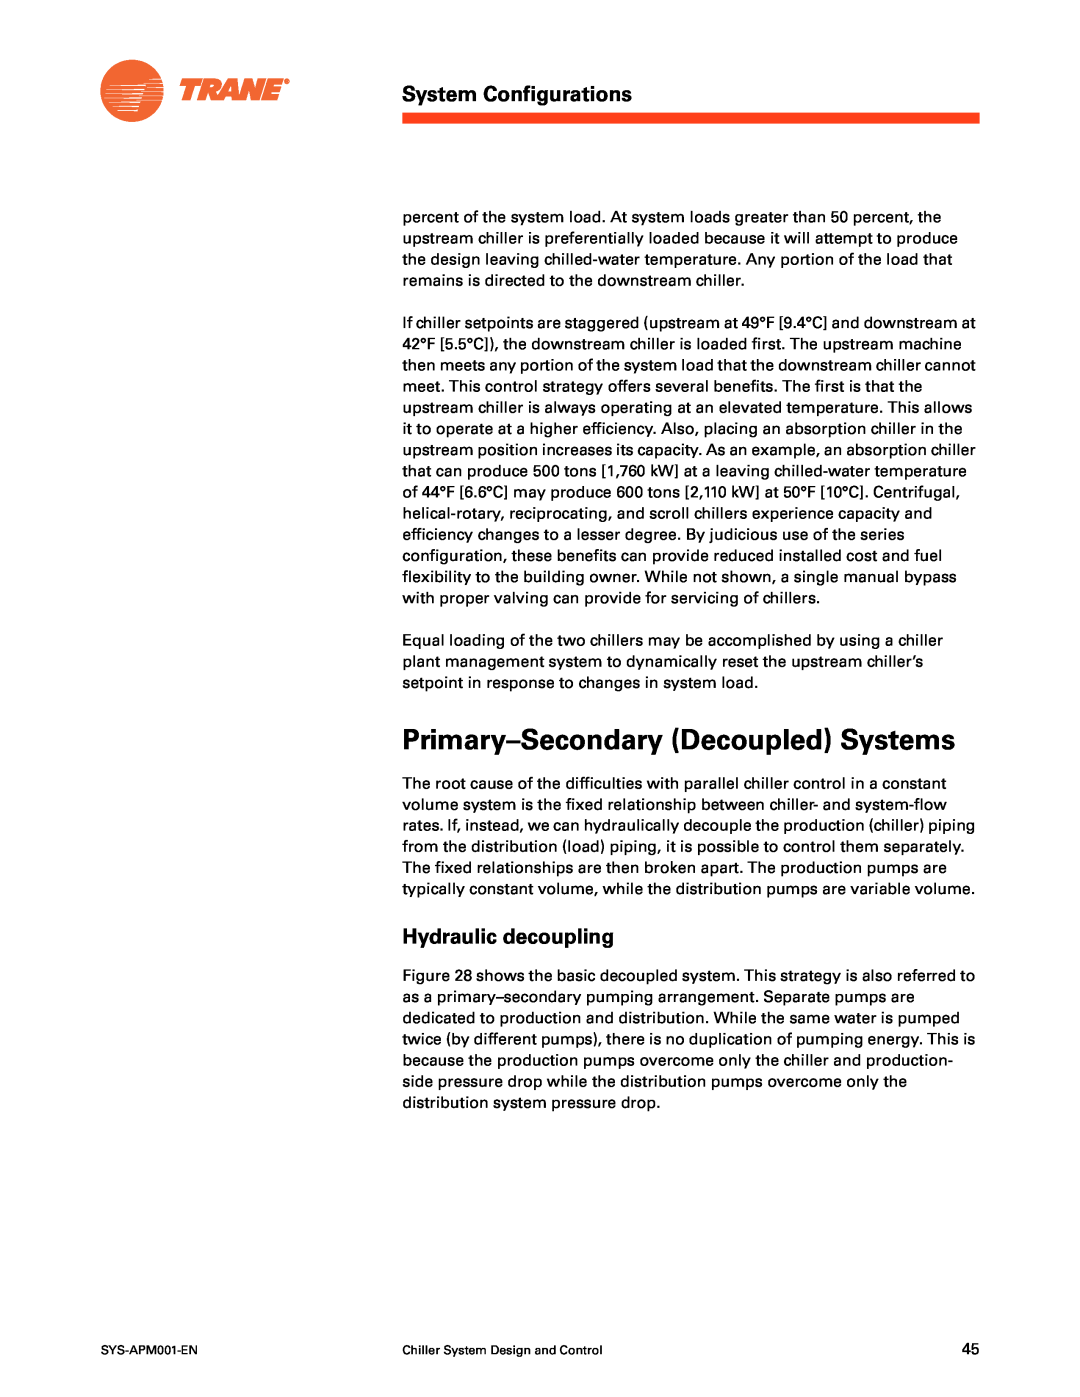 Trane SYS-APM001-EN manual Primary-Secondary Decoupled Systems, Hydraulic decoupling, System Configurations 